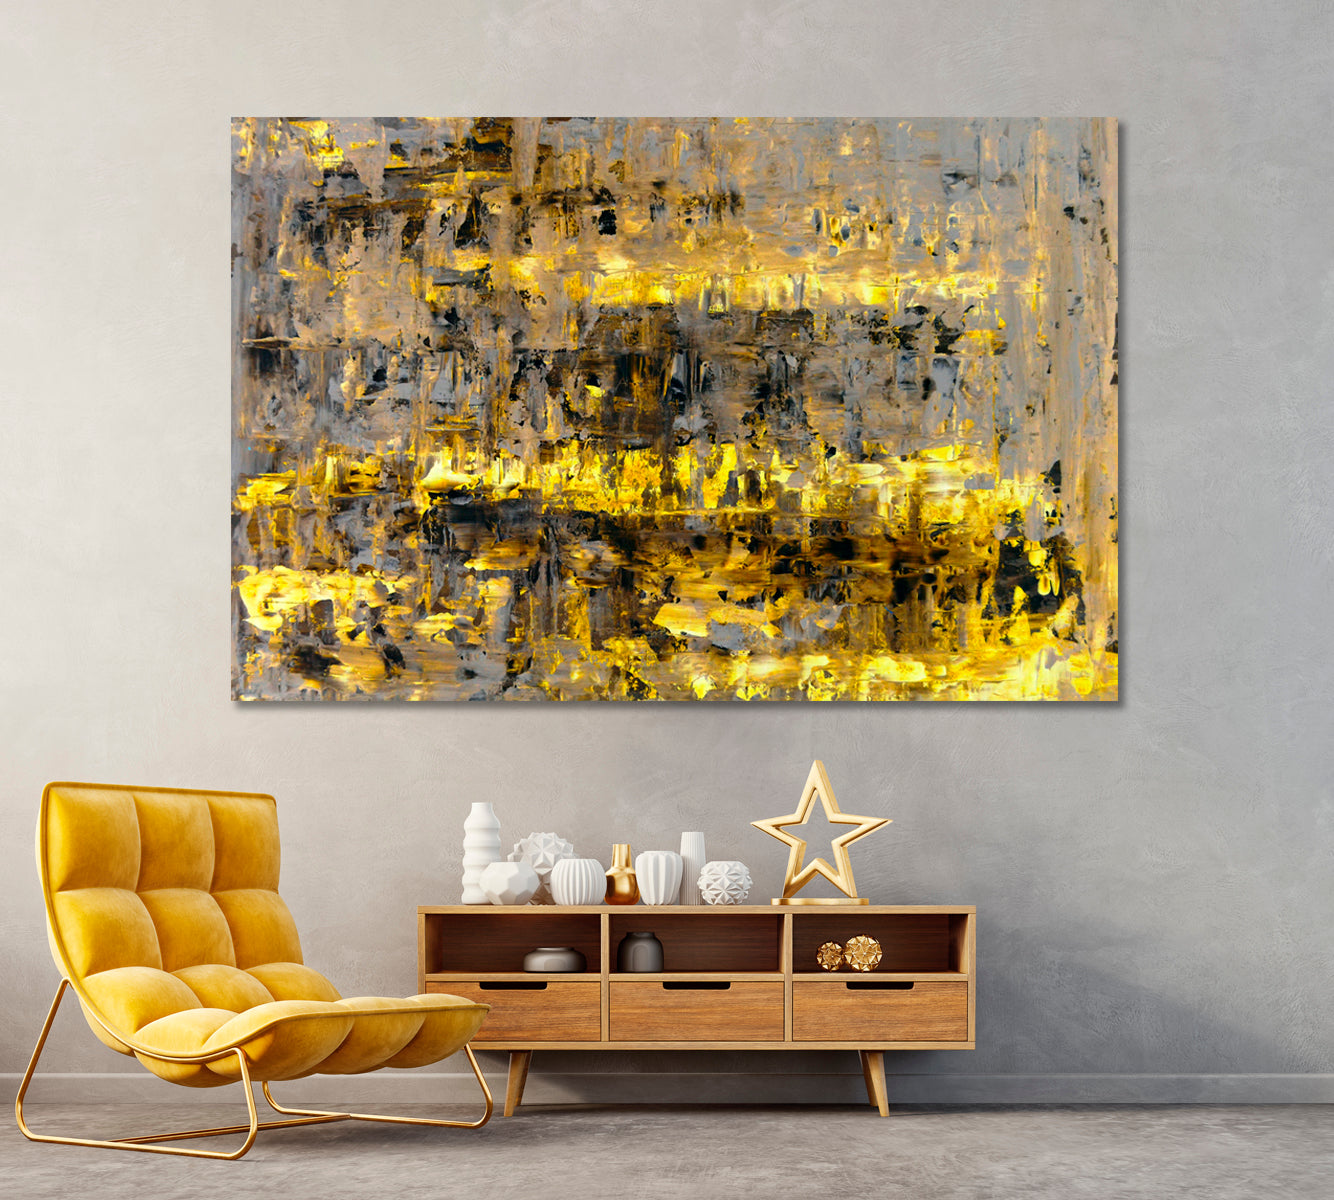 Bright Yellow Abstract Landscape Canvas Print ArtLexy 1 Panel 24"x16" inches 